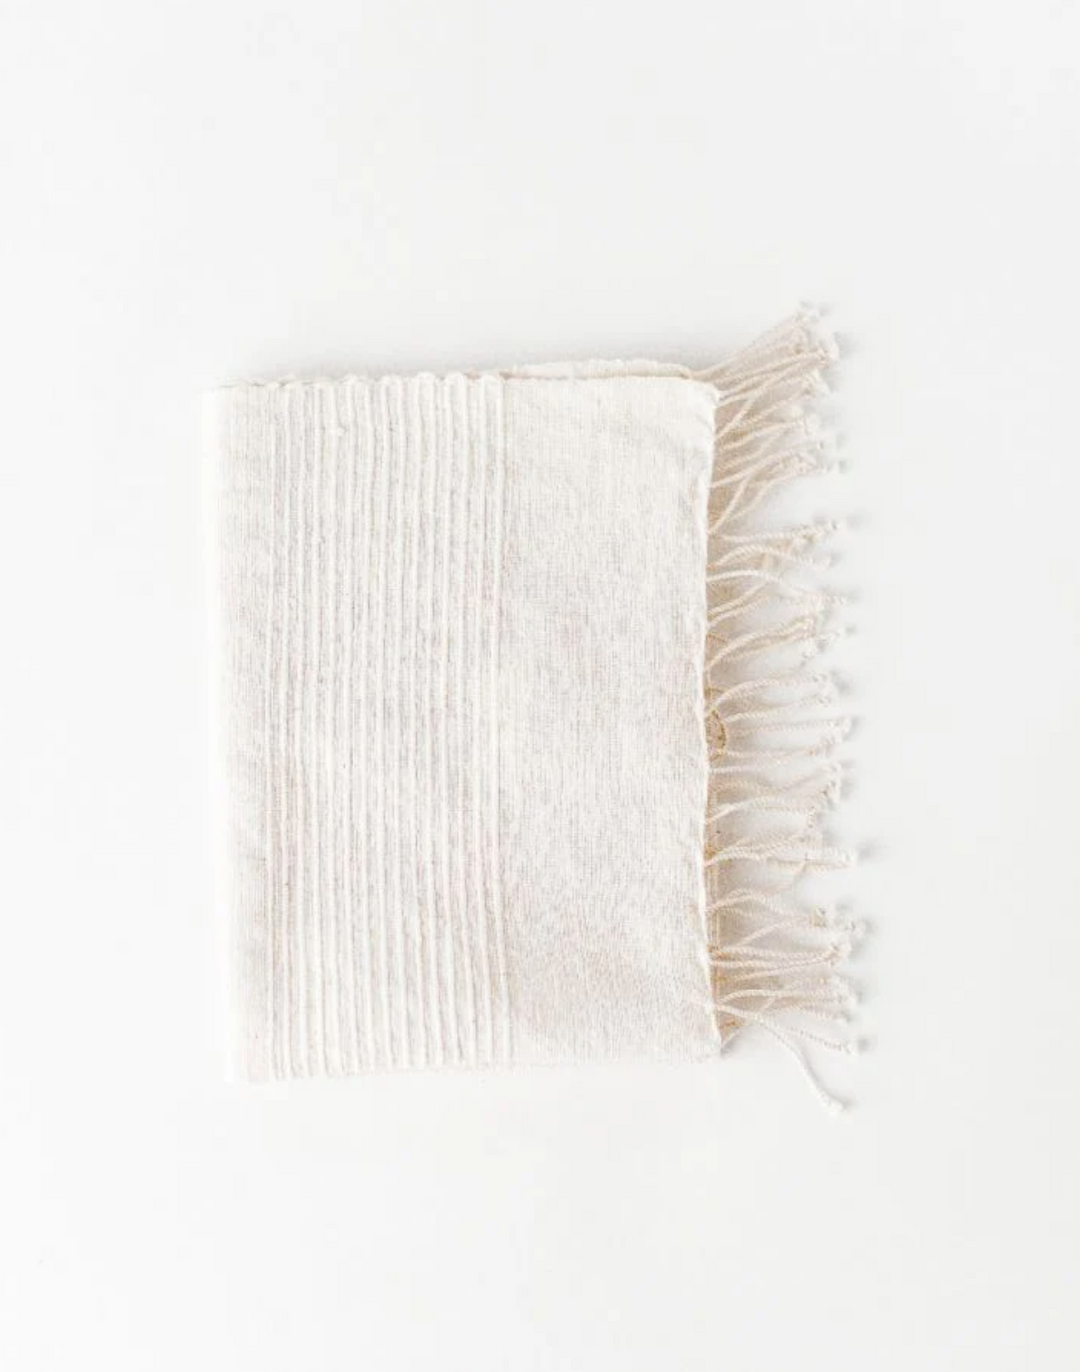 Riviera Hand Towel in Natural